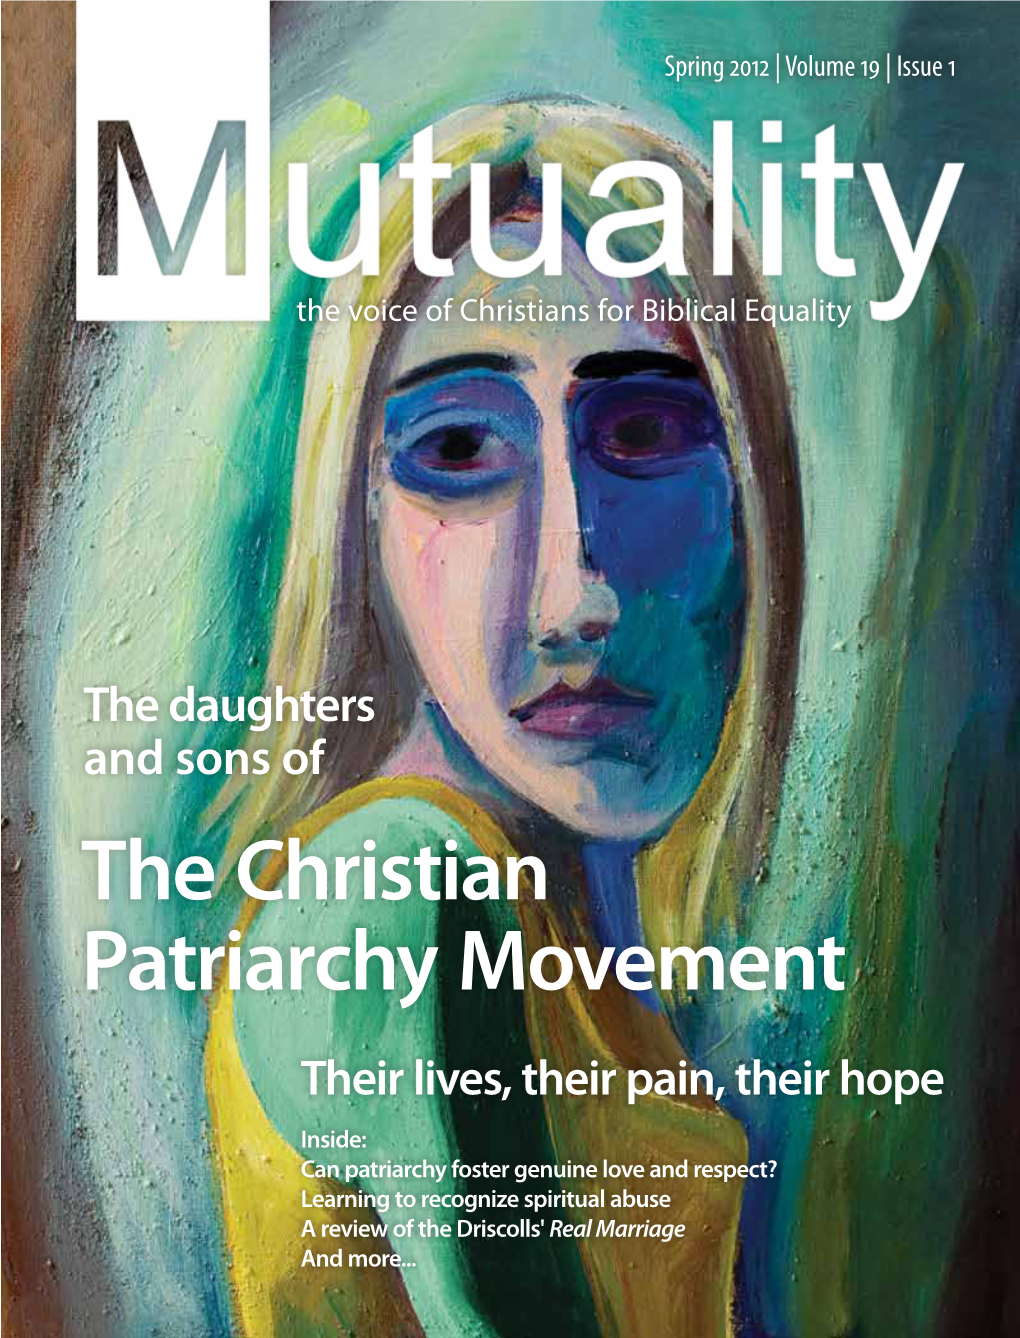 The Christian Patriarchy Movement